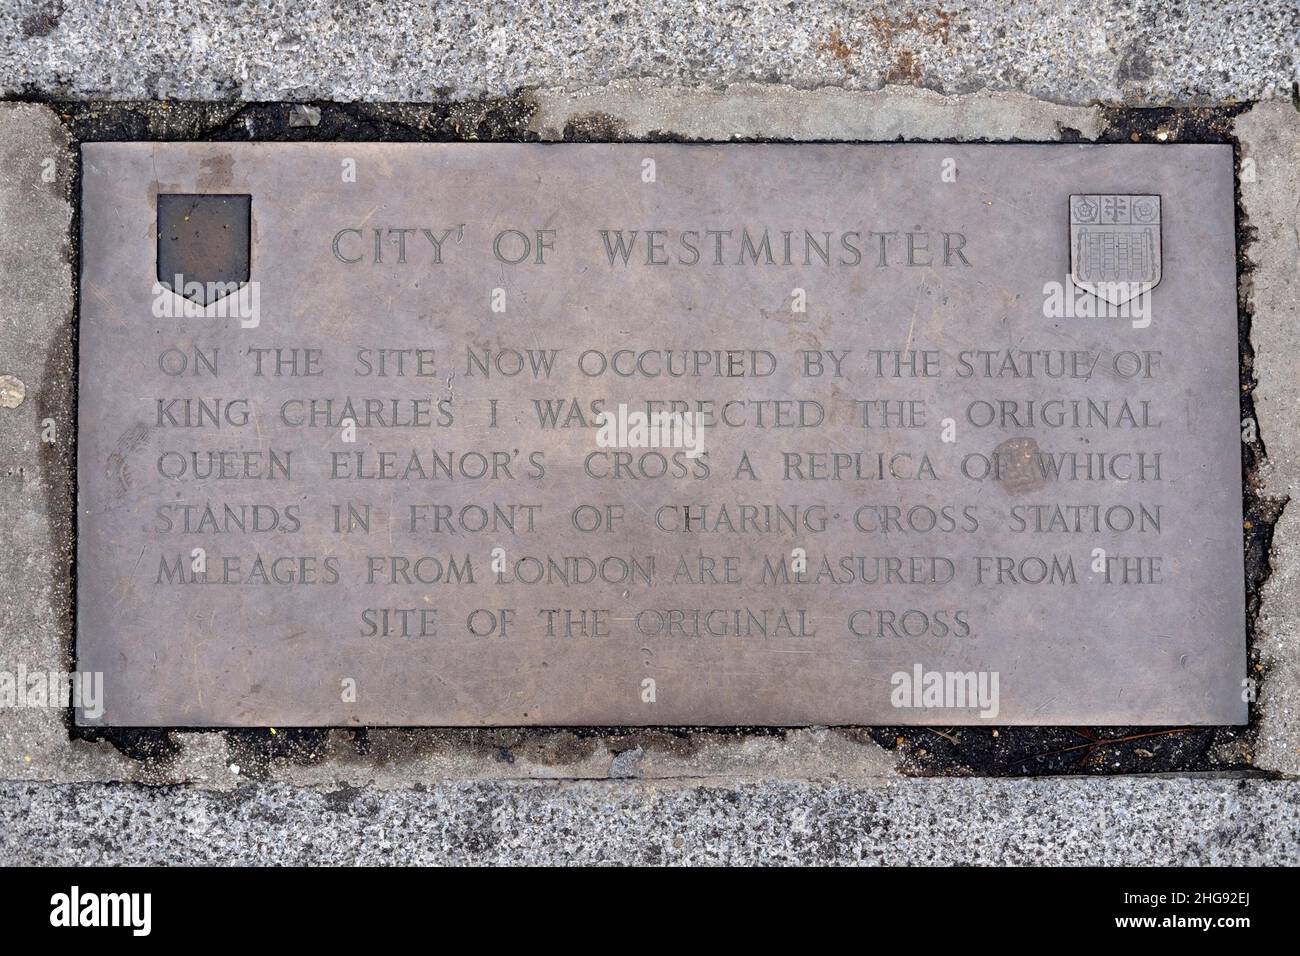 Commemorative plaque marking the spot, near Trafalgar Square, of the original Queen Eleanor's Cross and where all distances from London are measured. Stock Photo